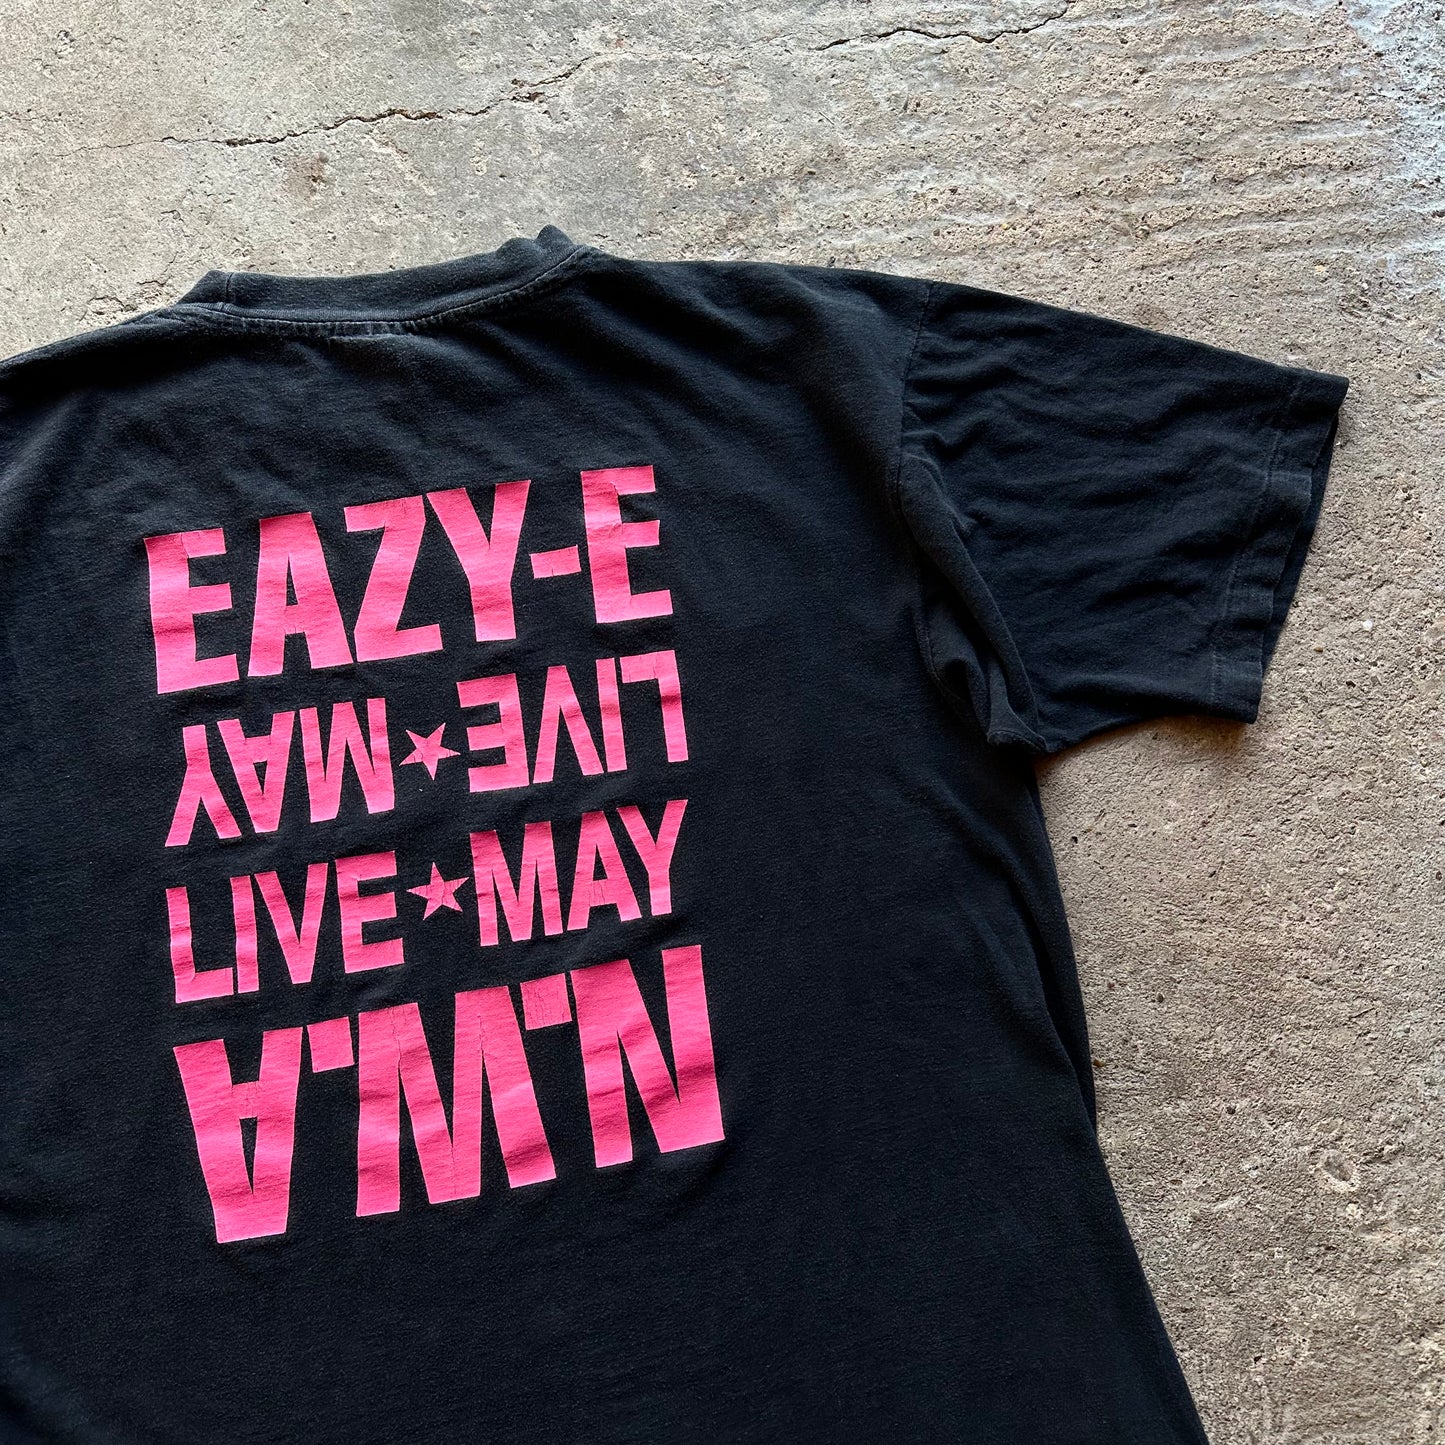 N.W.A. / Eazy-E - 'Live In May' - 1990 - XL